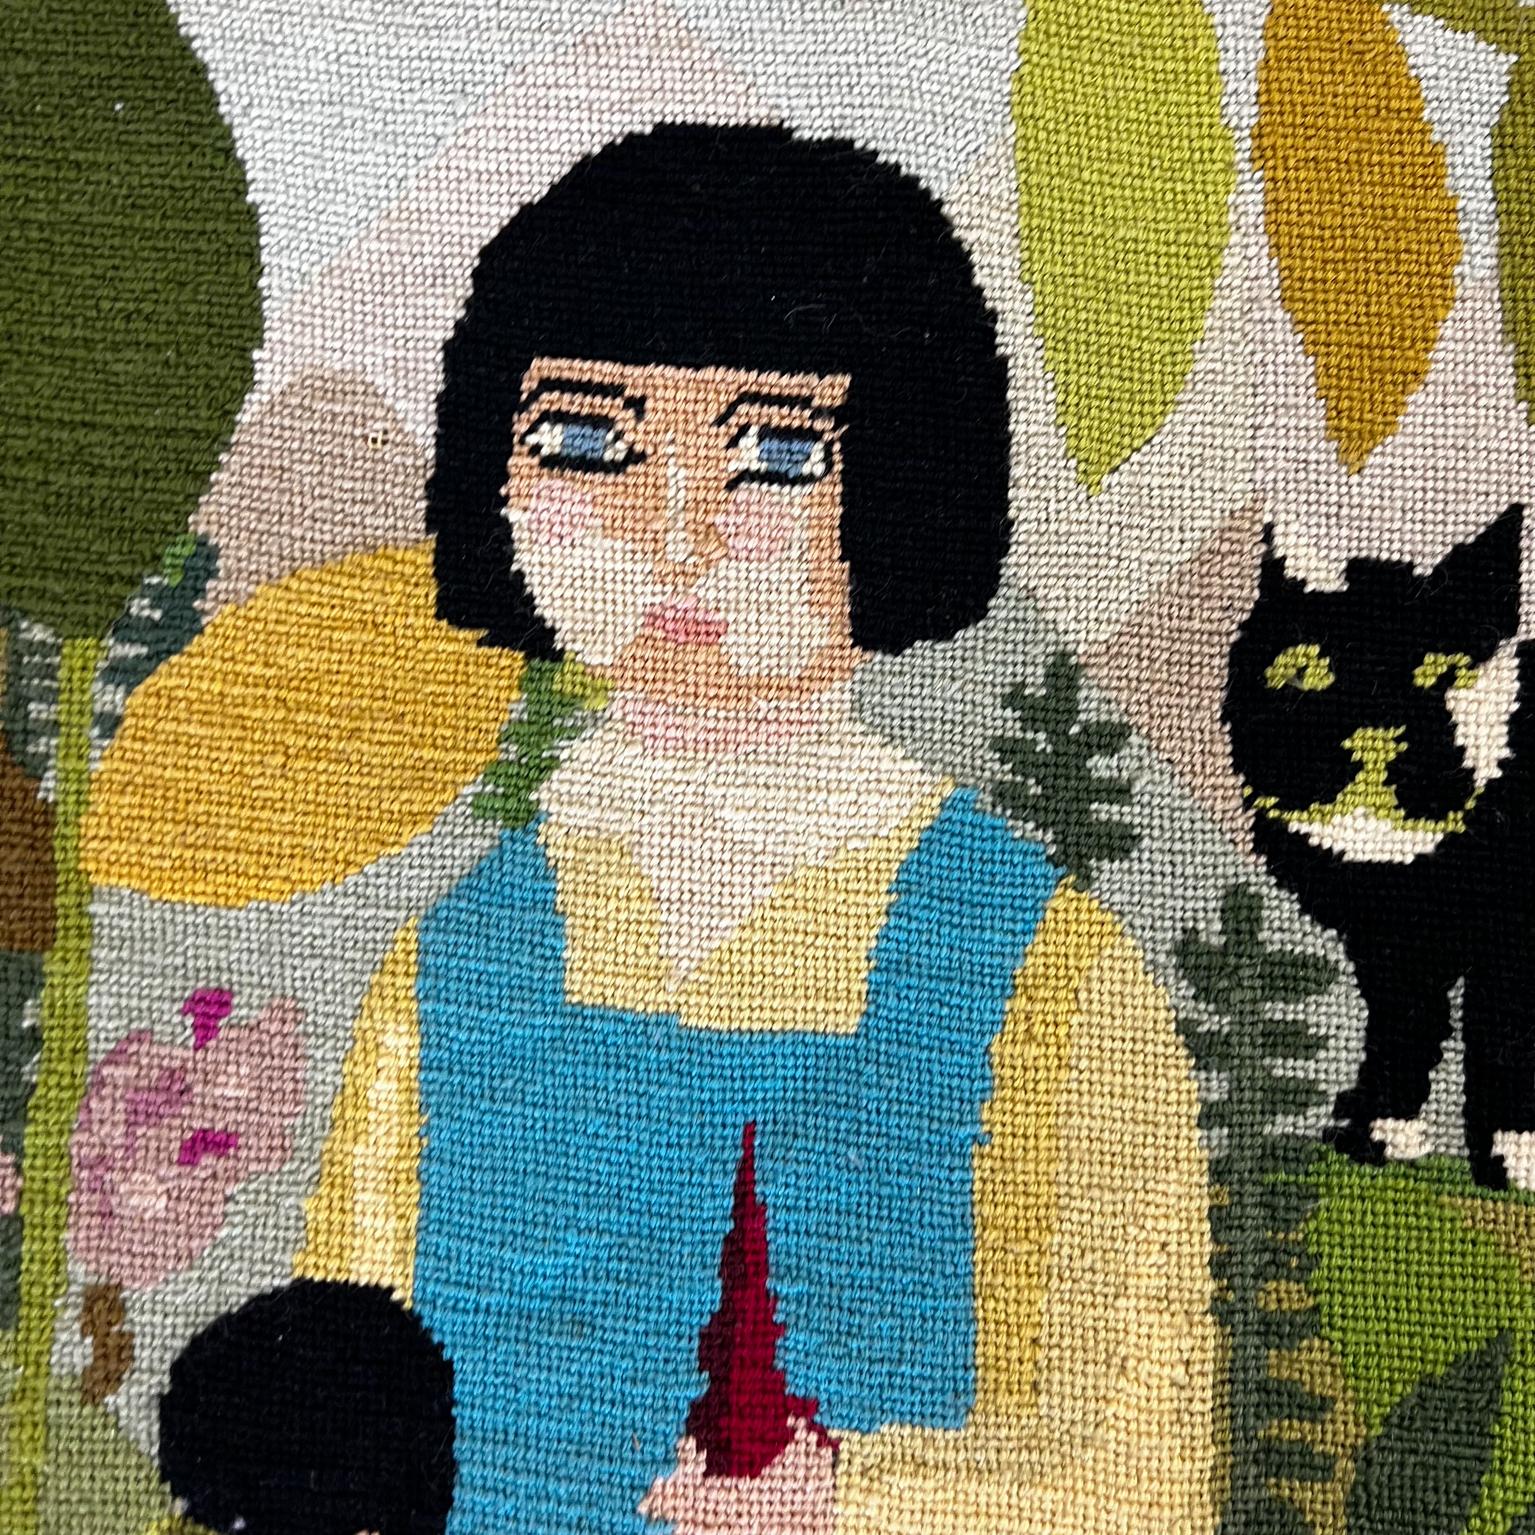 1970s Vibrant Handmade Needlepoint Embroidery Wall Artwork Girl Doll and Cat 3